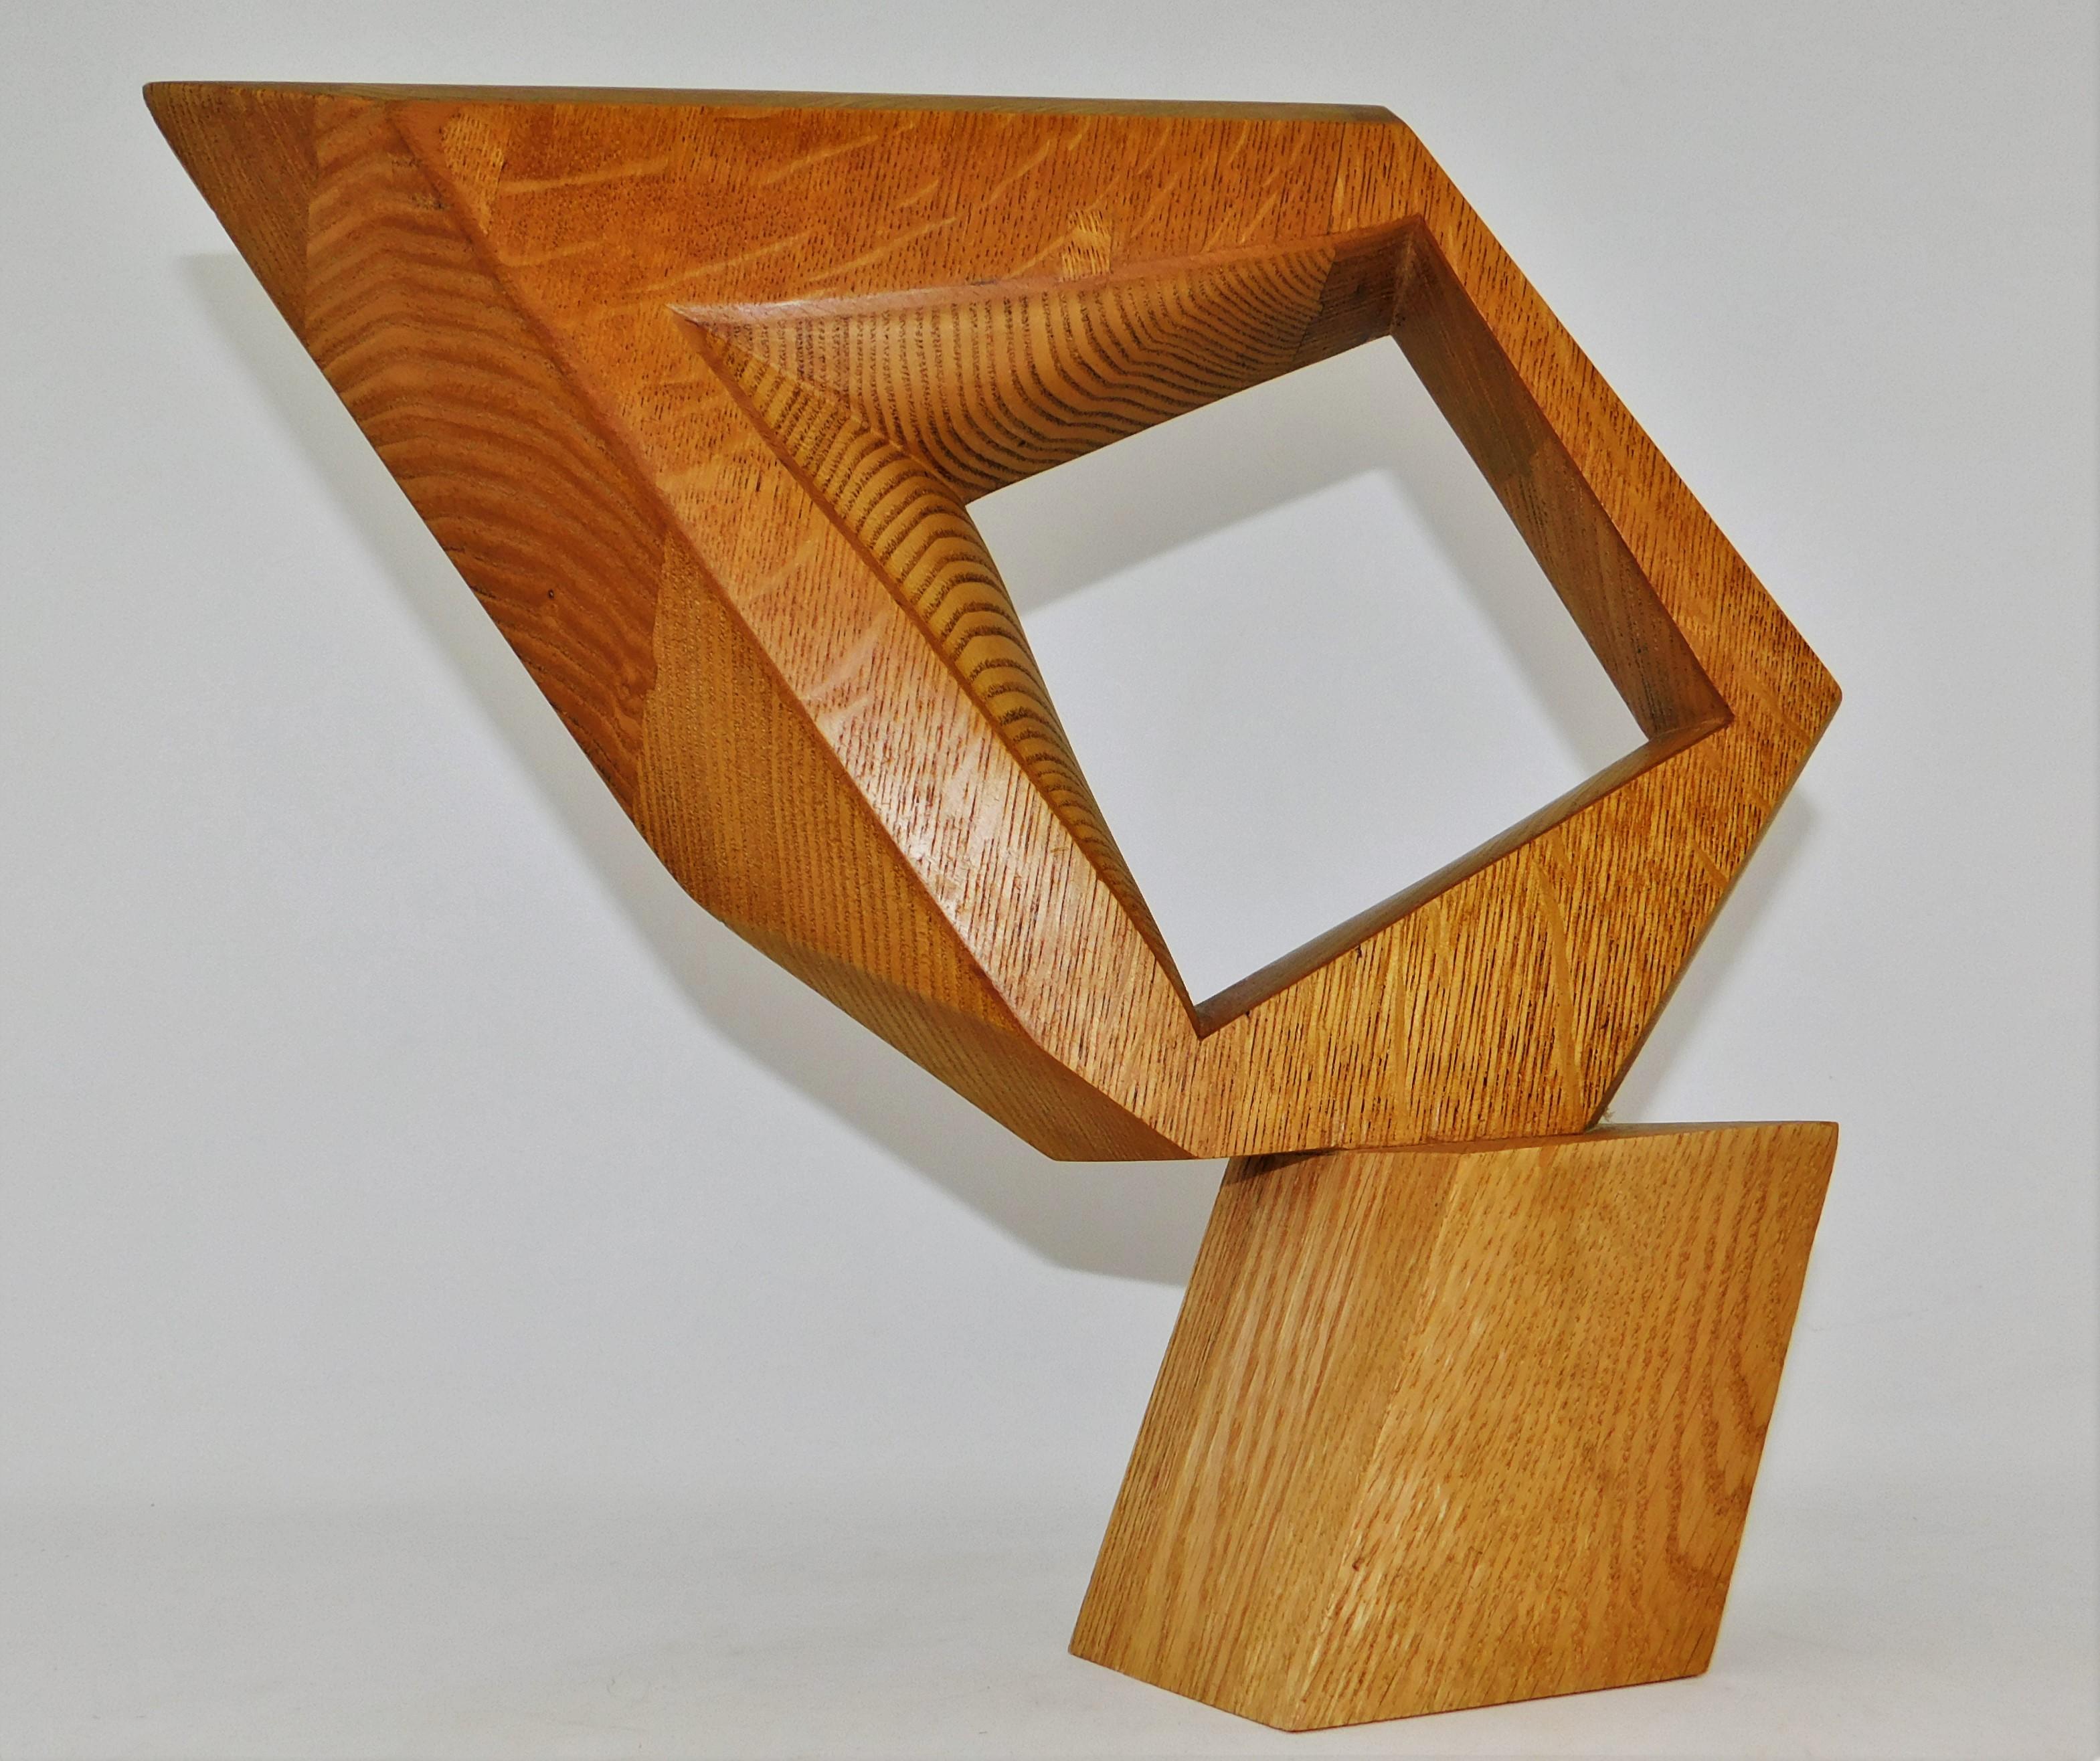 Signed Modern Abstract Constructivist Styled Wooden Oak Sculpture For Sale 1